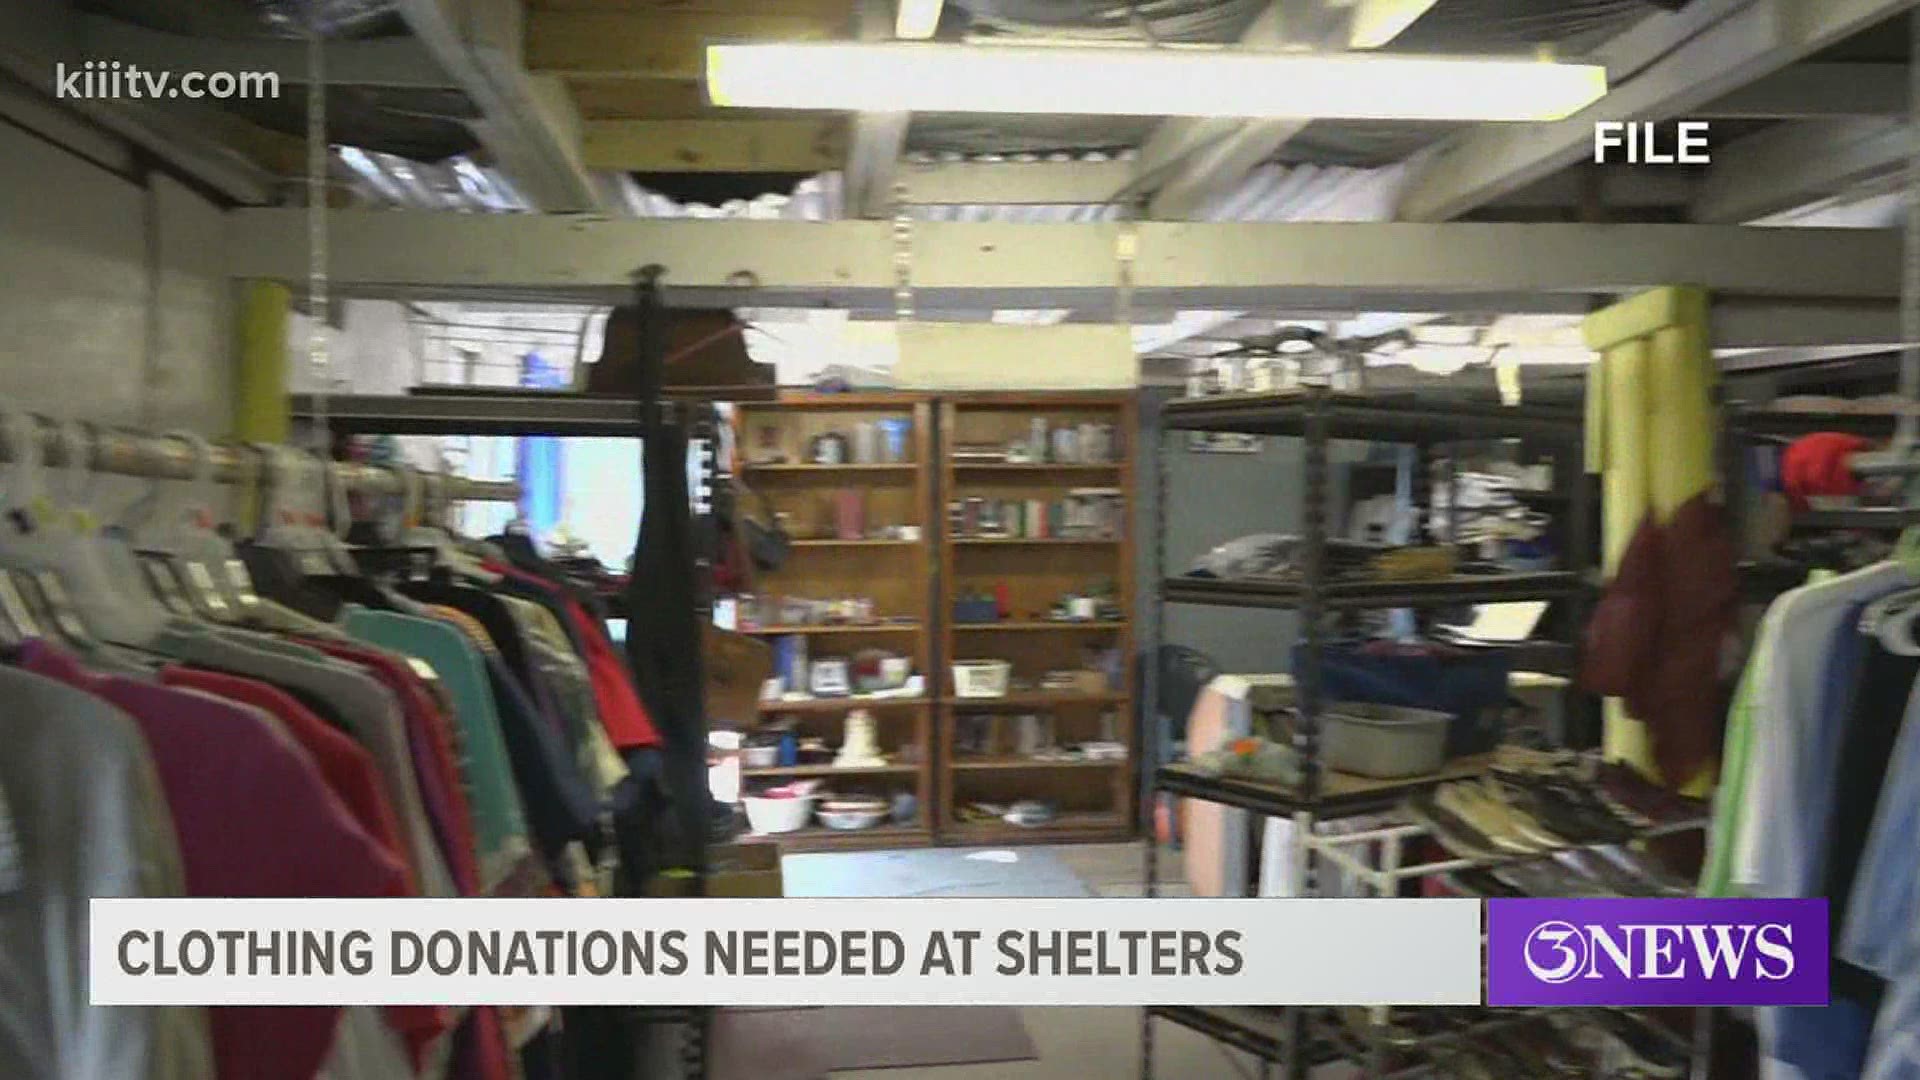 The change in weather has prompted shelters to ask the community to remember the ones that might not have warm clothing to make it through the cold season.